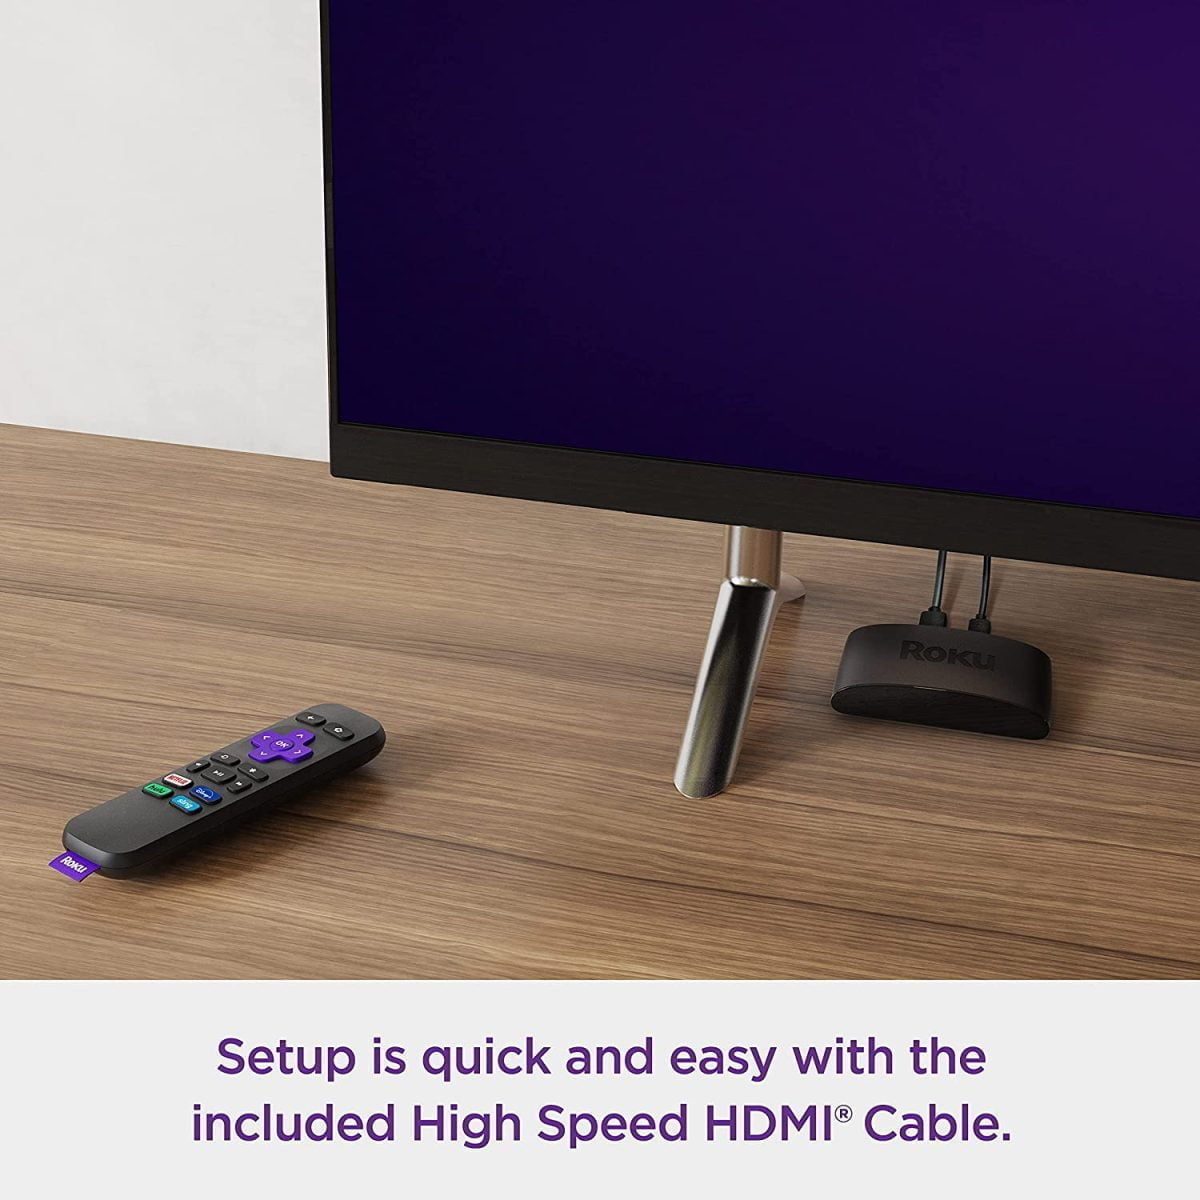 812Z Zipmls. Ac Sl1500 Roku &Lt;H1&Gt;Roku Express | Hd Streaming Media Player With High Speed Hdmi Cable And Simple Remote&Lt;/H1&Gt; &Lt;Ul Class=&Quot;A-Unordered-List A-Vertical A-Spacing-Mini&Quot;&Gt; &Lt;Li&Gt;&Lt;Span Class=&Quot;A-List-Item&Quot;&Gt; Streaming Made Easy: Roku Express Lets You Stream Free, Live And Premium Tv Over The Internet Right To Your Tv; It’s Perfect For New Users, Secondary Tvs And Easy Gifting But Powerful Enough For Seasoned Pros &Lt;/Span&Gt;&Lt;/Li&Gt; &Lt;Li&Gt;&Lt;Span Class=&Quot;A-List-Item&Quot;&Gt; Quick And Easy Setup: Just Plug It Into Your Tv With The Included High Speed Hdmi Cable And Connect To The Internet To Get Started &Lt;/Span&Gt;&Lt;/Li&Gt; &Lt;Li&Gt;&Lt;Span Class=&Quot;A-List-Item&Quot;&Gt; Tons Of Power, Tons Of Fun: Compact And Fast, You’ll Stream Your Favorites With Ease; With Movies And Series On Apple Tv+, Prime Video, Netflix, Disney+, Hbo Max, Showtime, And Hulu With Live Tv, Enjoy The Most Talked About Entertainment &Lt;/Span&Gt;&Lt;/Li&Gt; &Lt;Li&Gt;&Lt;Span Class=&Quot;A-List-Item&Quot;&Gt; Simple Remote: Incredibly Easy To Use, This Remote Features Shortcut Buttons To Popular Streaming Channels &Lt;/Span&Gt;&Lt;/Li&Gt; &Lt;Li&Gt;&Lt;Span Class=&Quot;A-List-Item&Quot;&Gt; Endless Entertainment: Stream It All, Including Free Tv, Live News, Sports, And More; Never Miss Award-Winning Shows, The Latest Blockbuster Hits, And More; Access 500, 000+ Movies And Tv Episodes; Stream What You Love And Cut Back On Cable Tv Bills &Lt;/Span&Gt;&Lt;/Li&Gt; &Lt;Li&Gt;&Lt;Span Class=&Quot;A-List-Item&Quot;&Gt; Enjoy Free Tv Channels: Stream Live Tv, 24/7 News, Sports, Movies, Shows, And More On The Roku Channel, Plus A Huge Collection Of Free Entertainment From Top Channels On Featured Free &Lt;/Span&Gt;&Lt;/Li&Gt; &Lt;/Ul&Gt; &Lt;Div Class=&Quot;A-Row A-Expander-Container A-Expander-Inline-Container&Quot;&Gt; &Lt;Div Class=&Quot;A-Expander-Content A-Expander-Extend-Content A-Expander-Content-Expanded&Quot;&Gt; &Lt;Ul Class=&Quot;A-Unordered-List A-Vertical A-Spacing-None&Quot;&Gt; &Lt;Li&Gt;&Lt;Span Class=&Quot;A-List-Item&Quot;&Gt;The Free Roku Mobile App: Turn Your Ios Or Android Device Into The Ultimate Streaming Companion; Control Your Roku Express Media Player Or Roku Tv, Use Voice Search, Enjoy Private Listening, And More On Ios And Android&Lt;/Span&Gt;&Lt;/Li&Gt; &Lt;Li&Gt;&Lt;Span Class=&Quot;A-List-Item&Quot;&Gt;Automatic Software Updates: Get The Most Up To Date Software Including All The Latest Features And Available Channels Without Even Thinking About It&Lt;/Span&Gt;&Lt;/Li&Gt; &Lt;Li&Gt;&Lt;Span Class=&Quot;A-List-Item&Quot;&Gt;Works With Popular Voice Assistants: Enjoy Easy Voice Control With Siri, Alexa, Or Hey Google&Lt;/Span&Gt;&Lt;/Li&Gt; &Lt;/Ul&Gt; &Lt;/Div&Gt; &Lt;/Div&Gt; Roku Express Roku Express | Hd Streaming Media Player With High Speed Hdmi Cable And Simple Remote